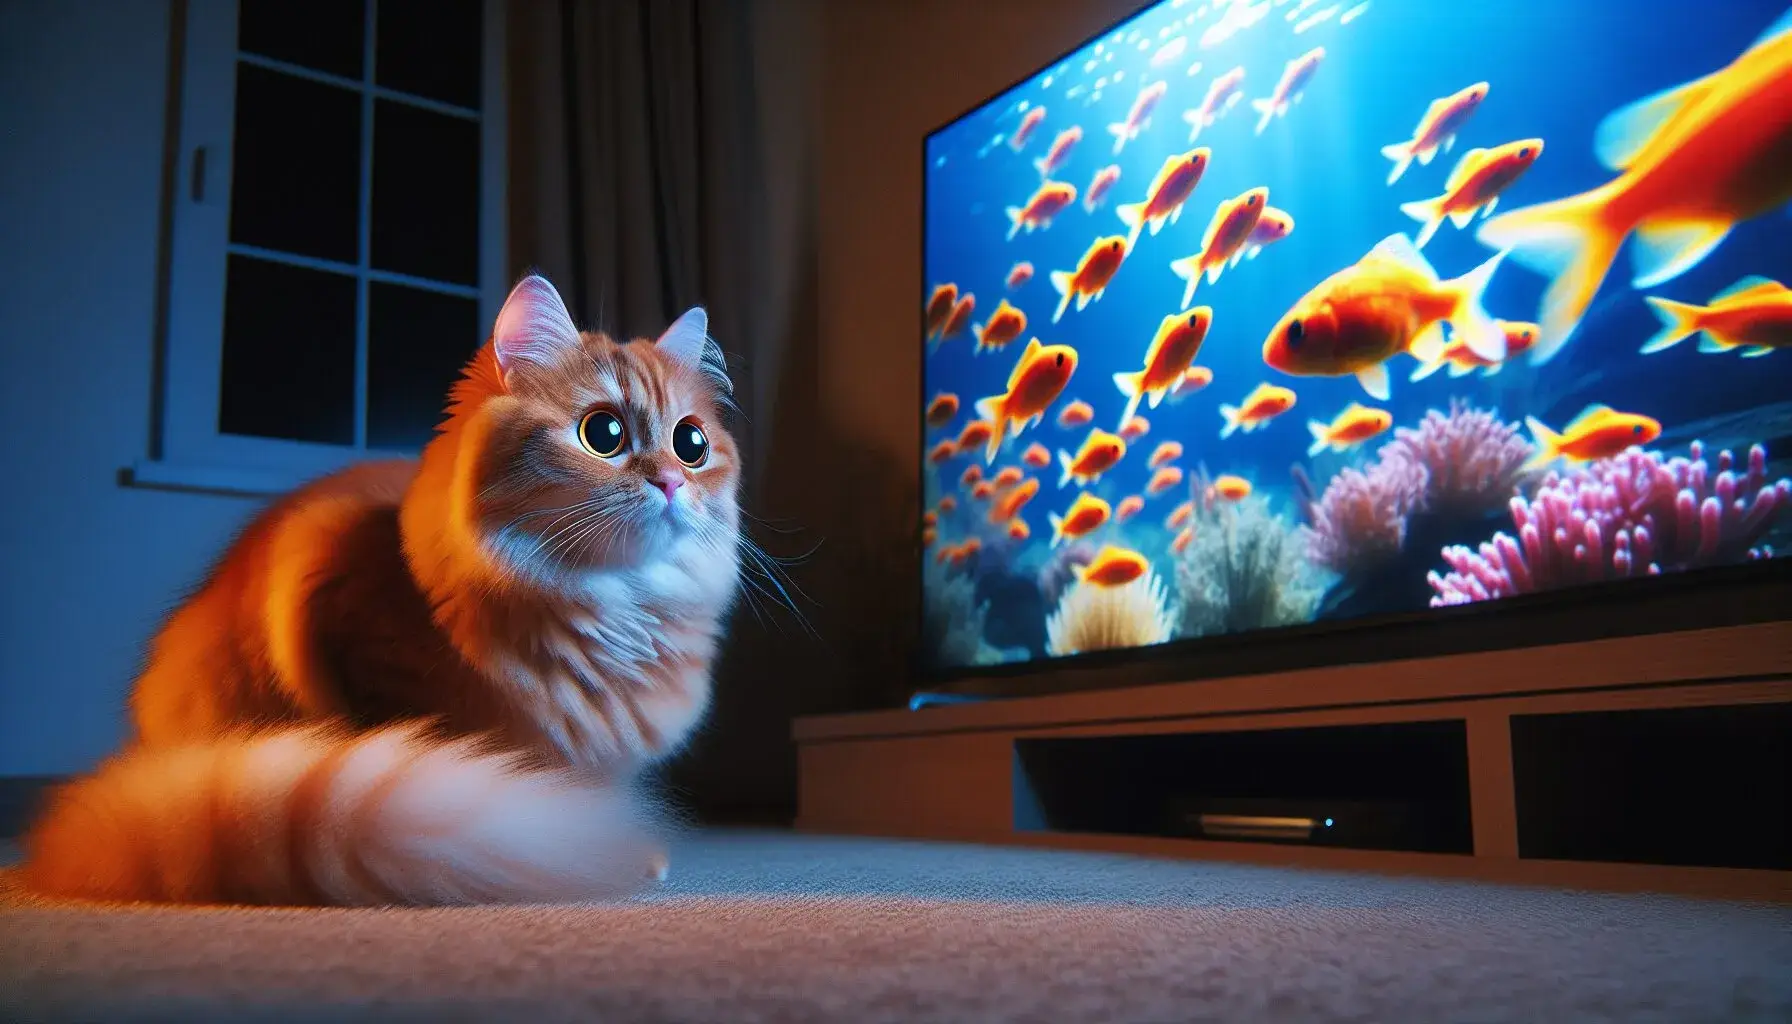 An illustration of a cat with dilated pupils watching TV